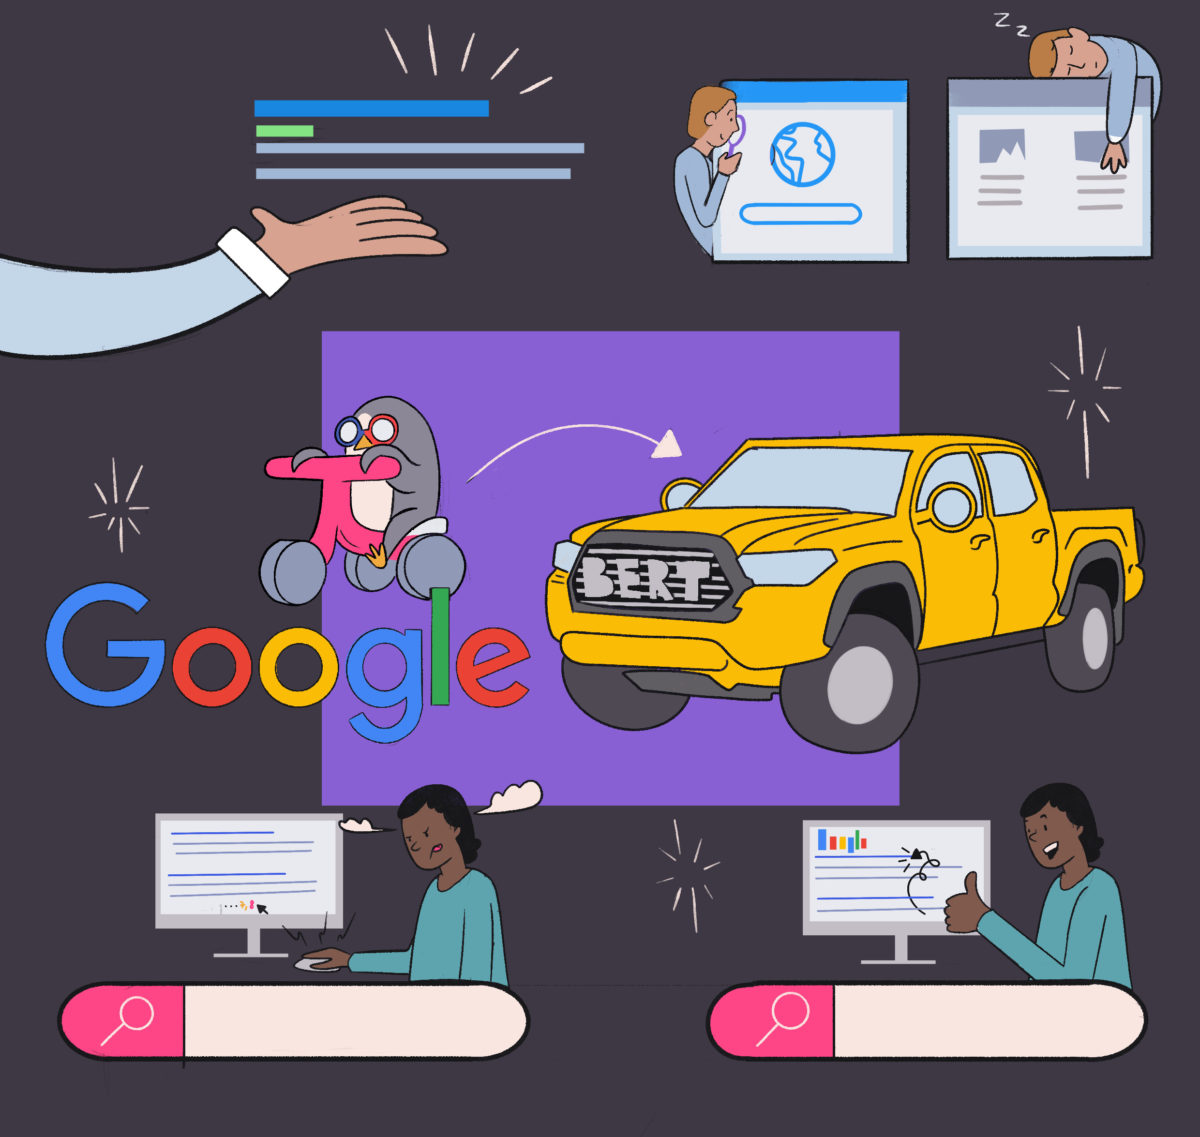 An illustrative collage featuring elements of modern work life, including google's logo, a pickup truck, individuals working on computers, and various business-related icons.